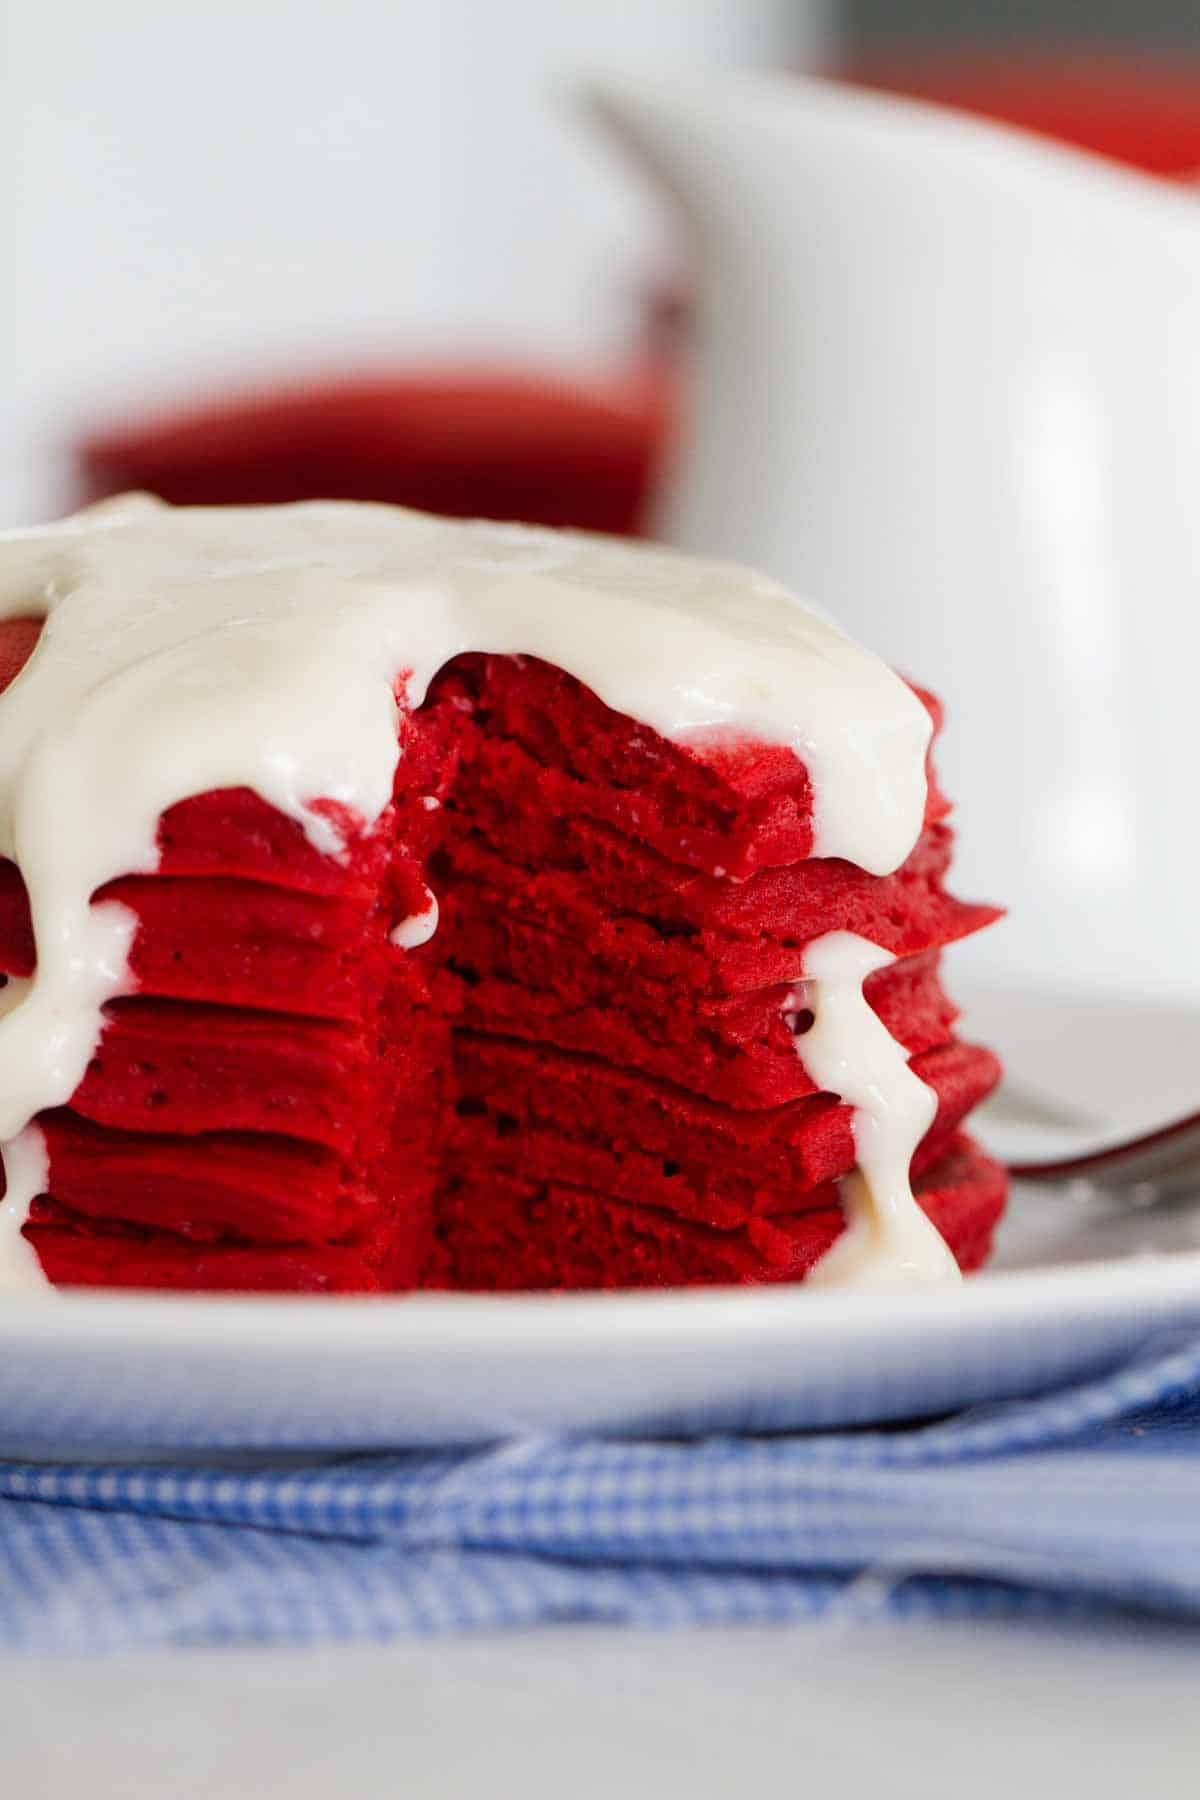 Inside view showing the fluffy texture of Red Velvet Pancakes.